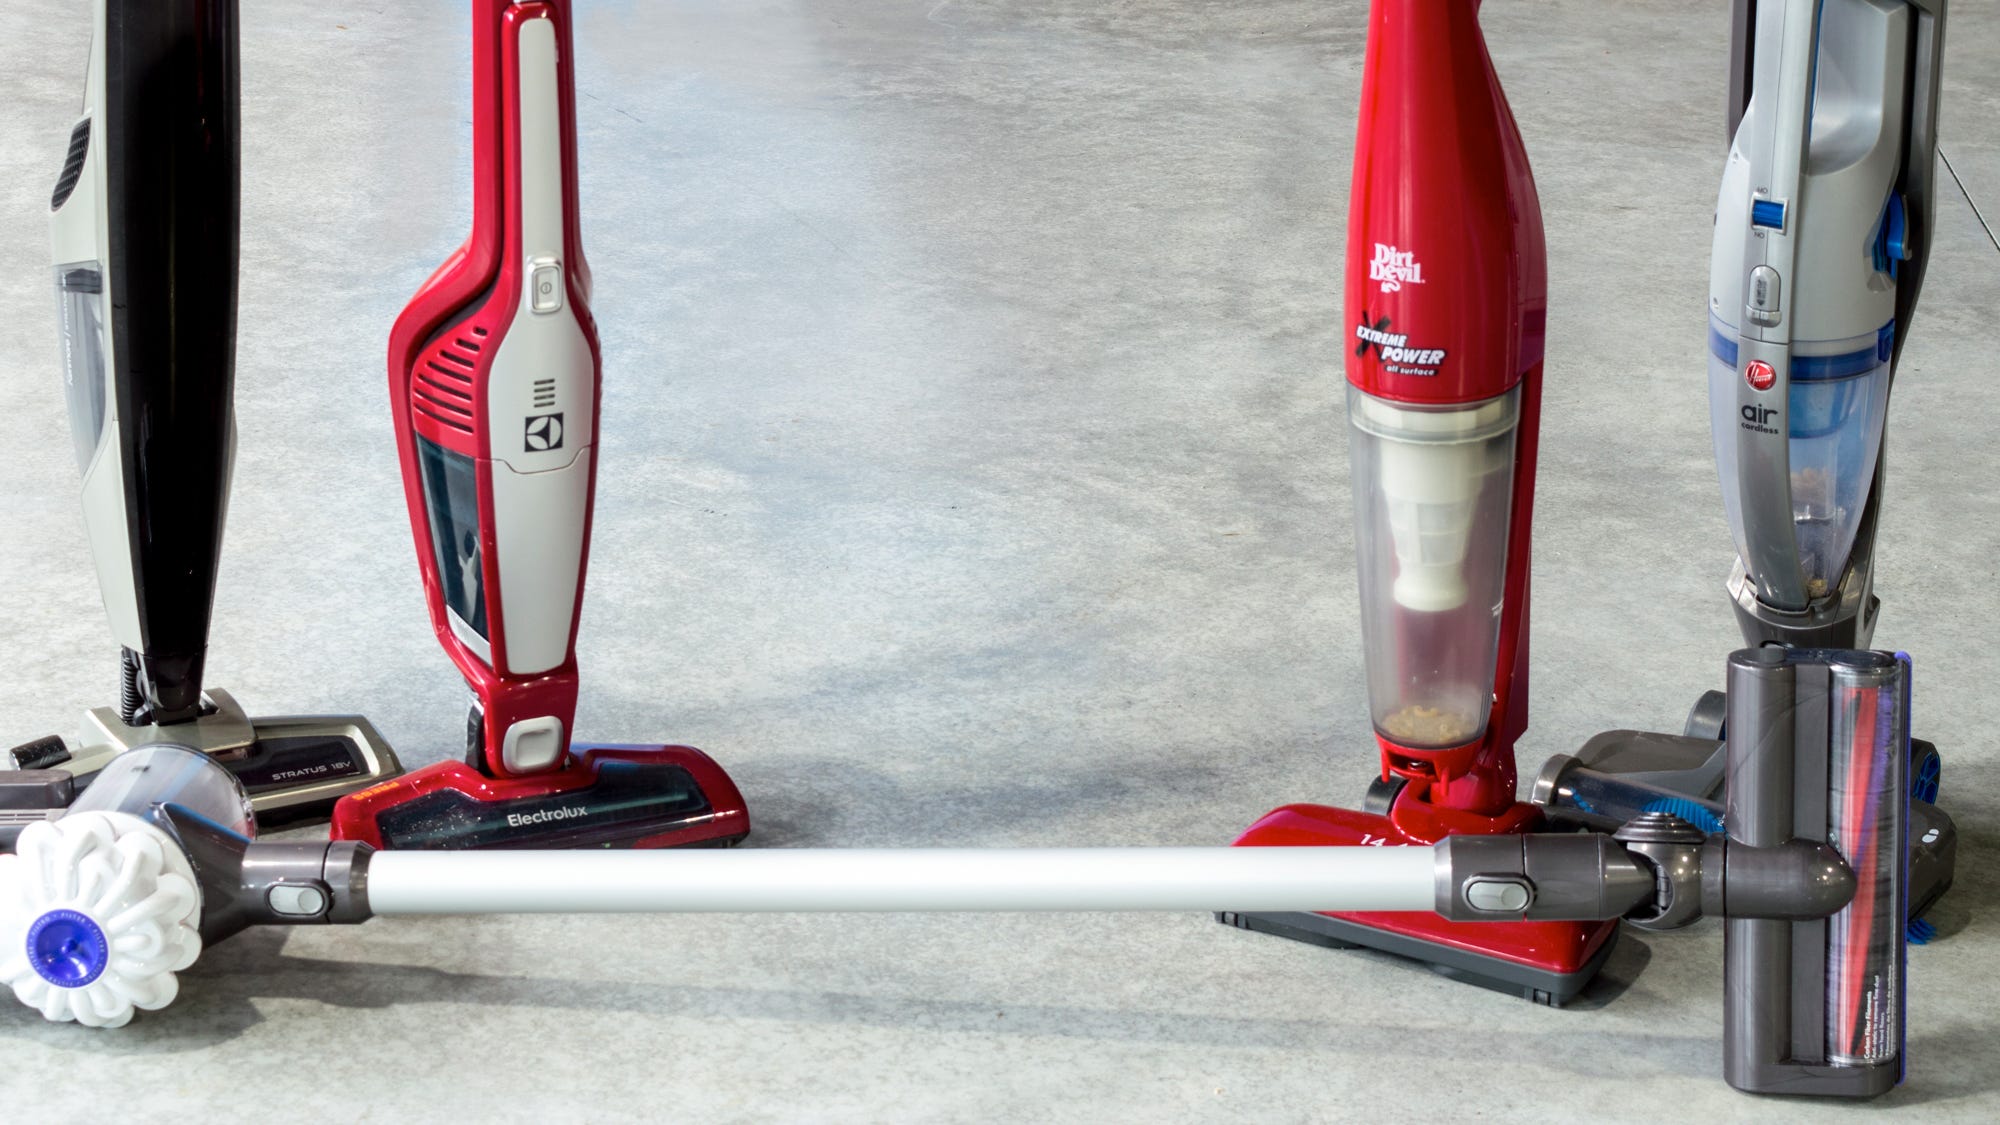 The Best Cordless Vacuums Of 2020, Which Dyson Stick Is Best For Hardwood Floors